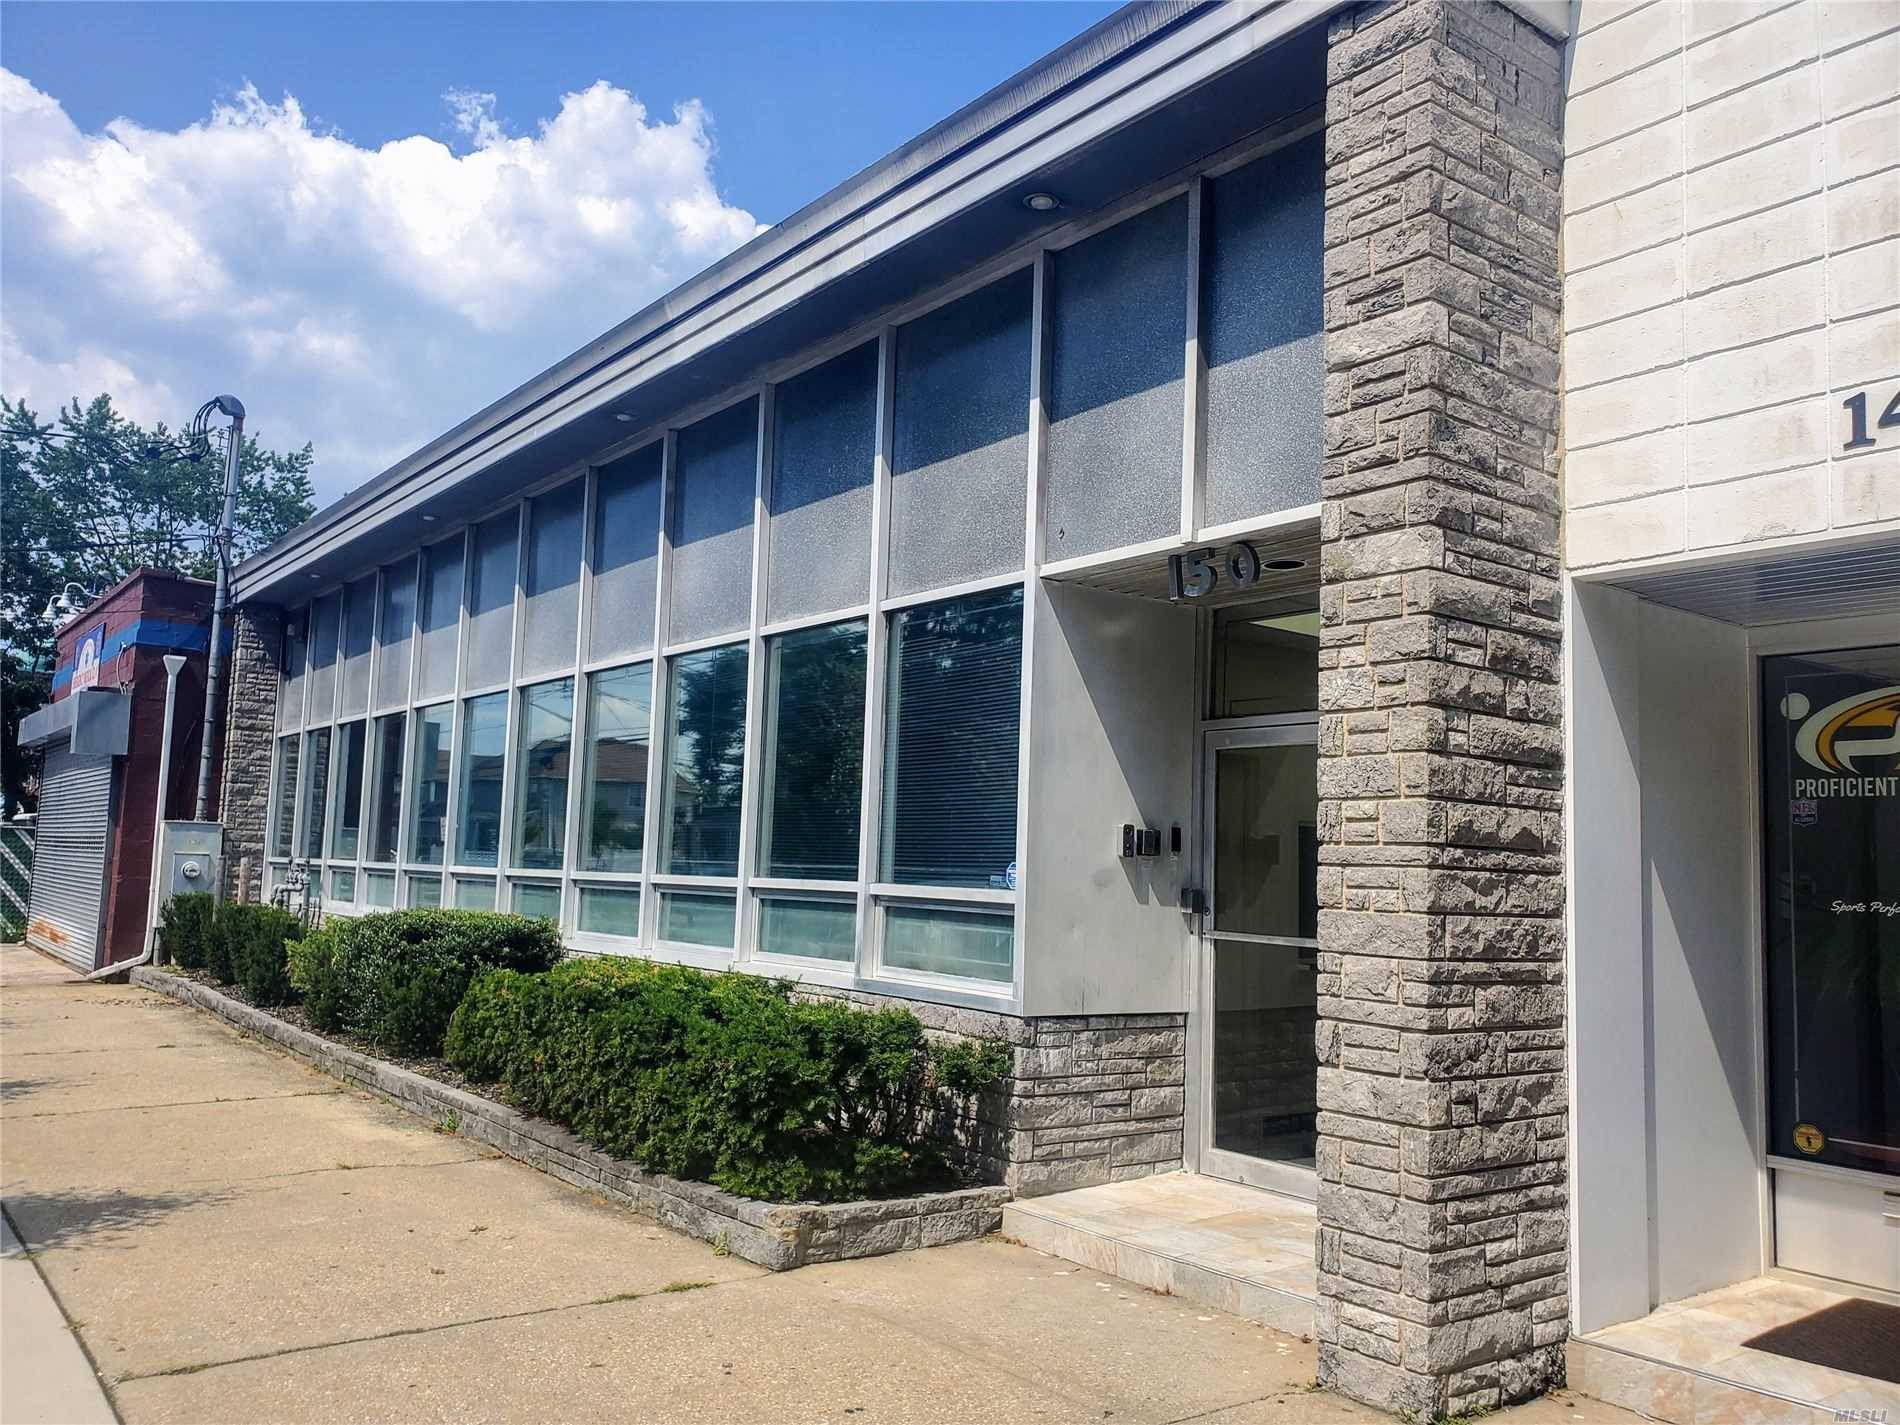 Incredible 9200 Sqft Office Warehouse space strategically located right off Sunrise Hwy in Lynbrook.